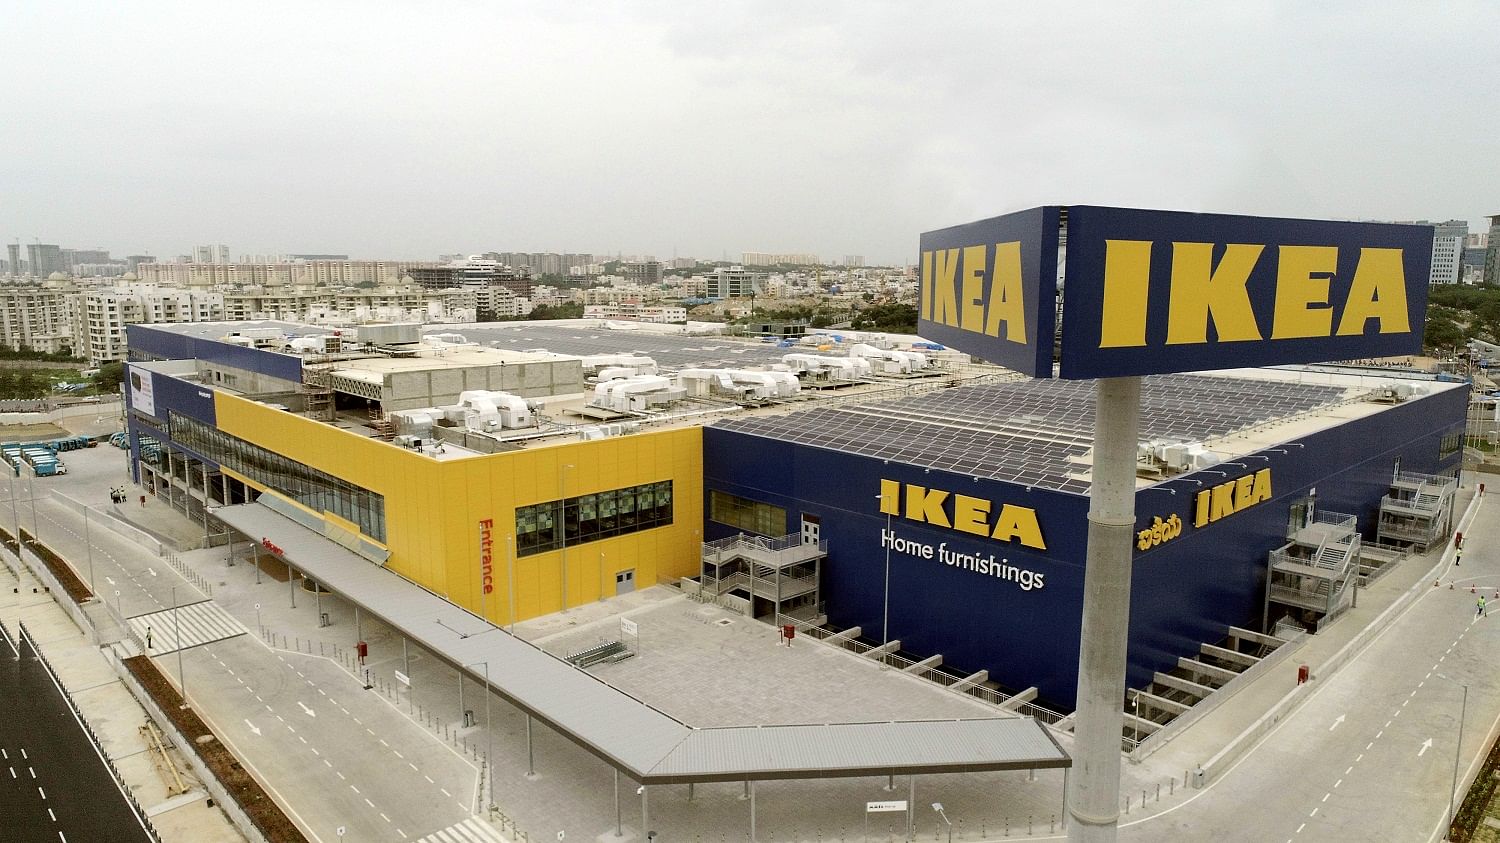 An exterior view of the IKEA Hyderabad store